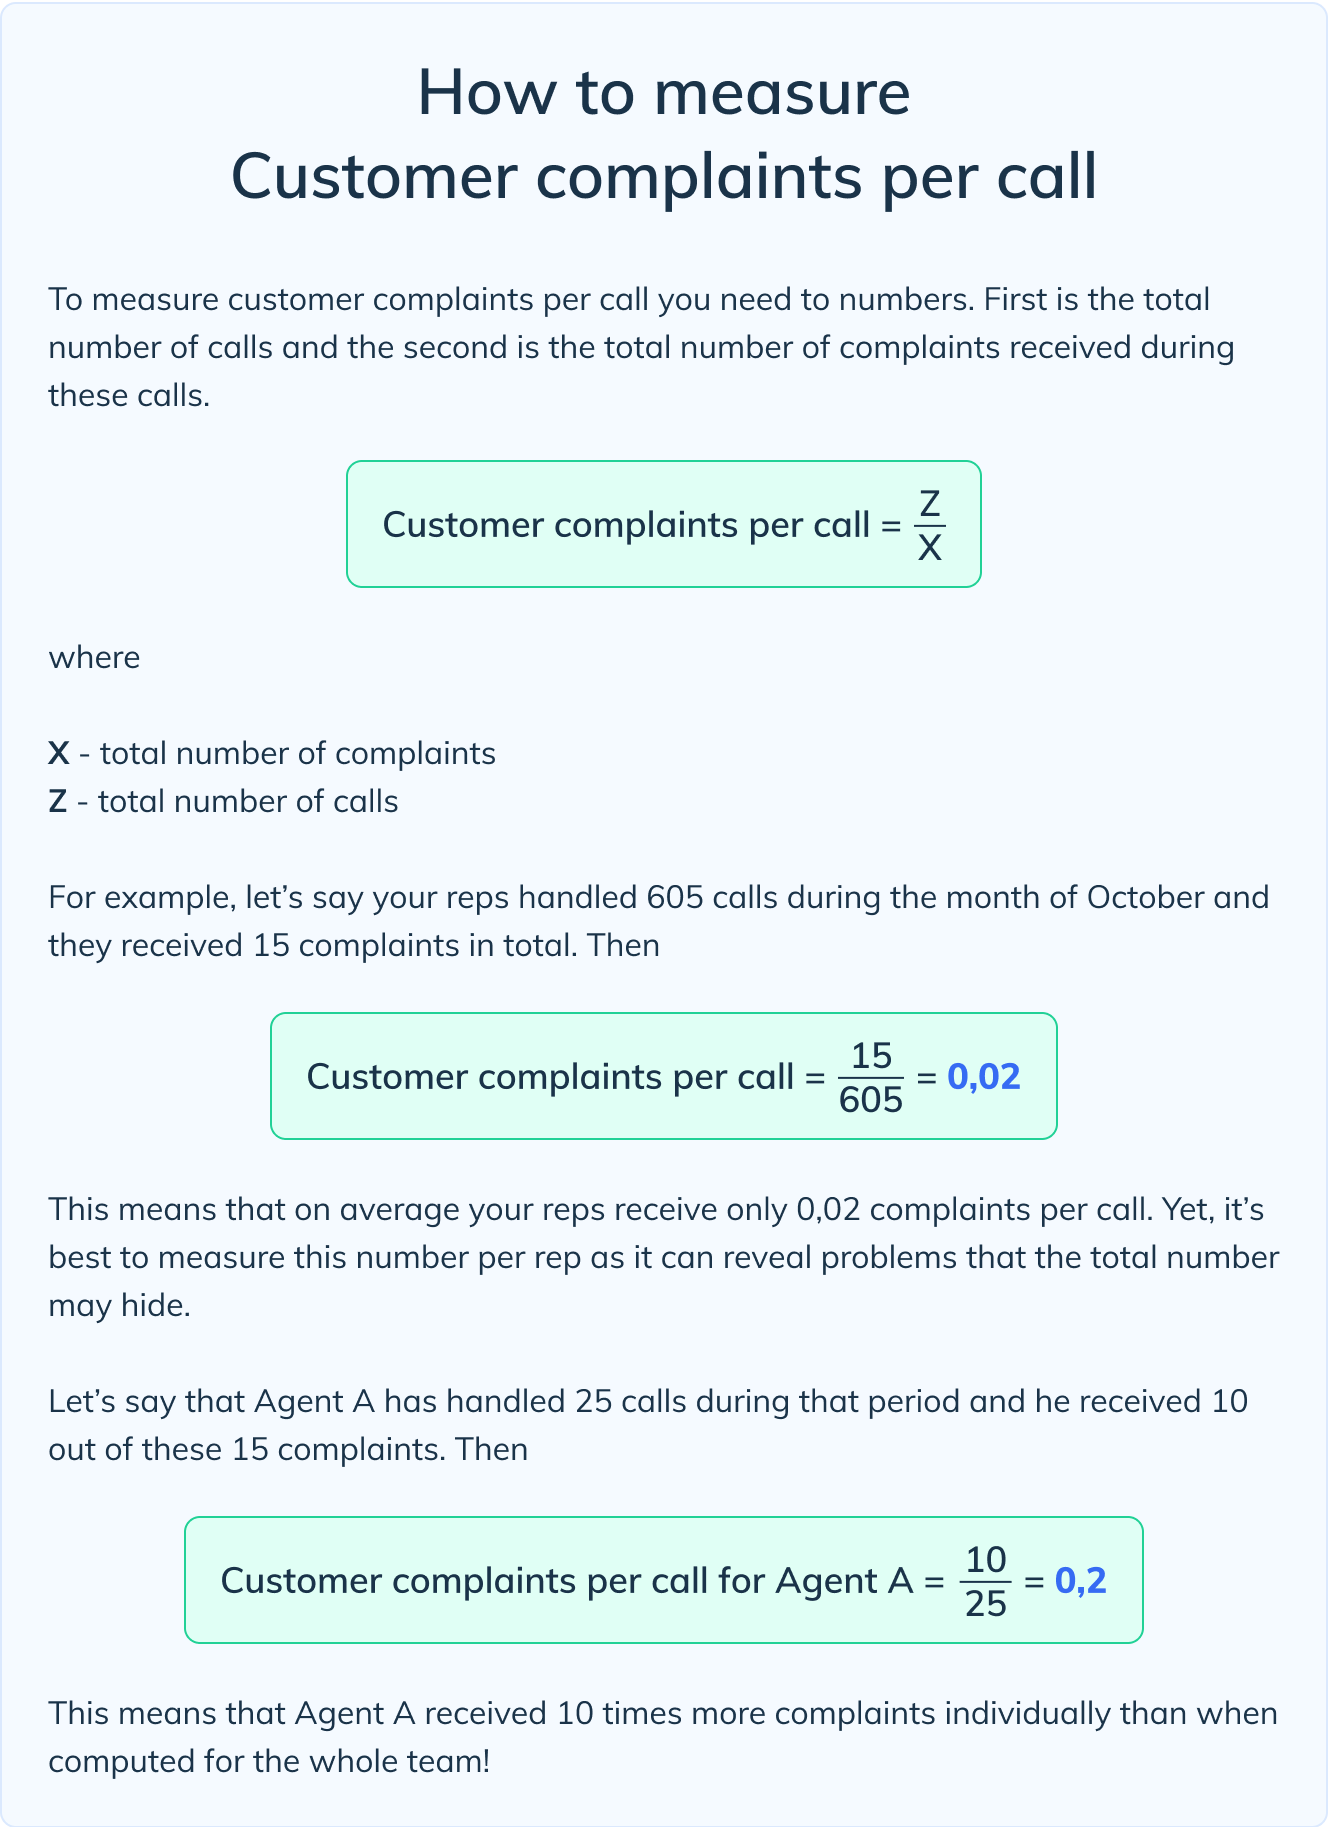 How to measure Customer complaints per call